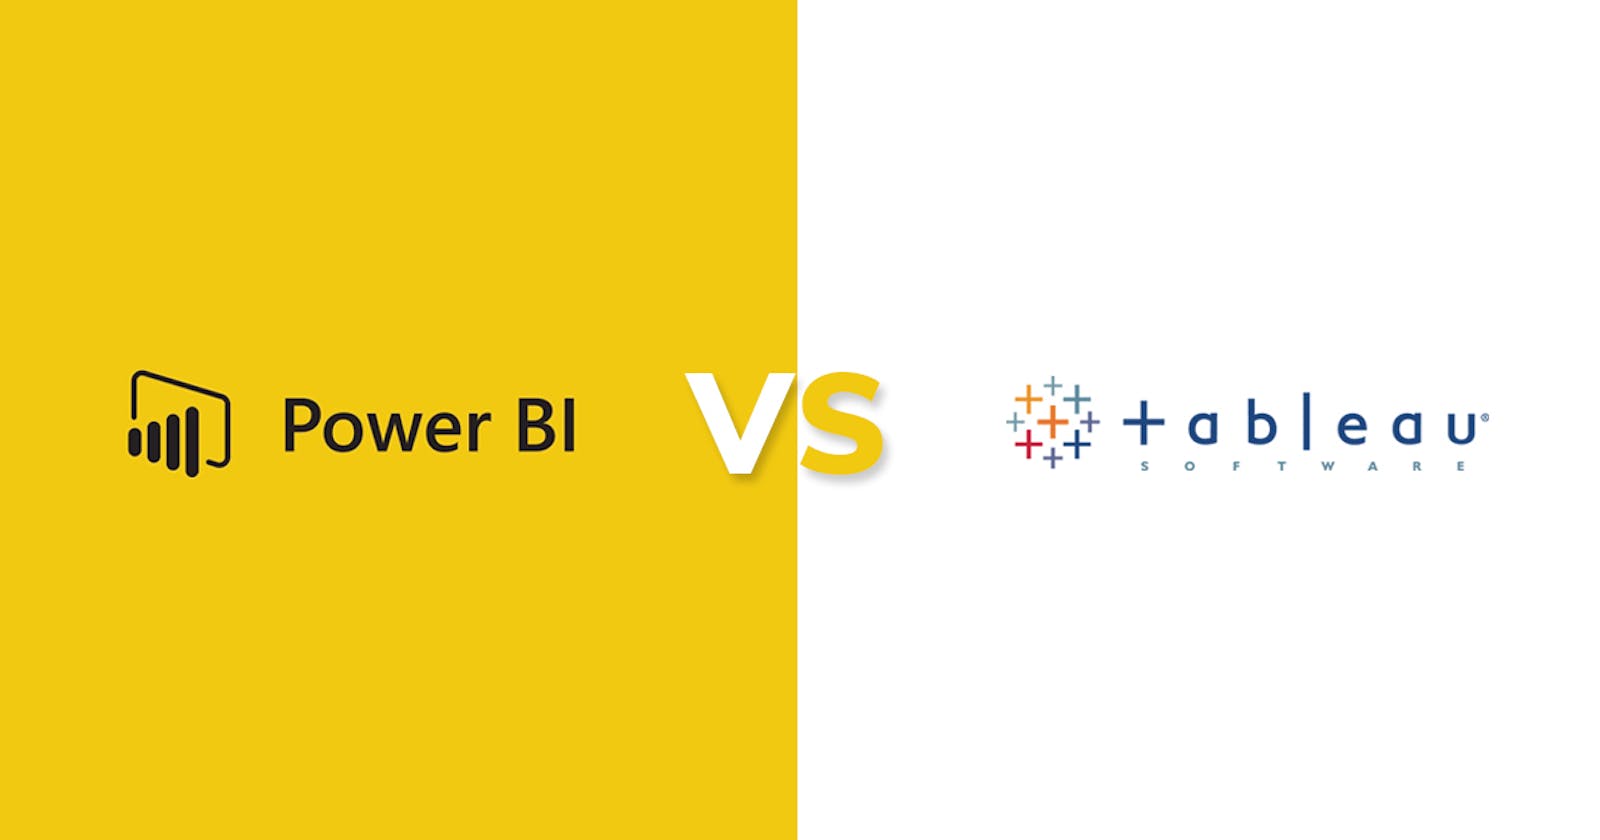 Power Bi or Tableau: What’s your preferred Business Intelligence Platform?